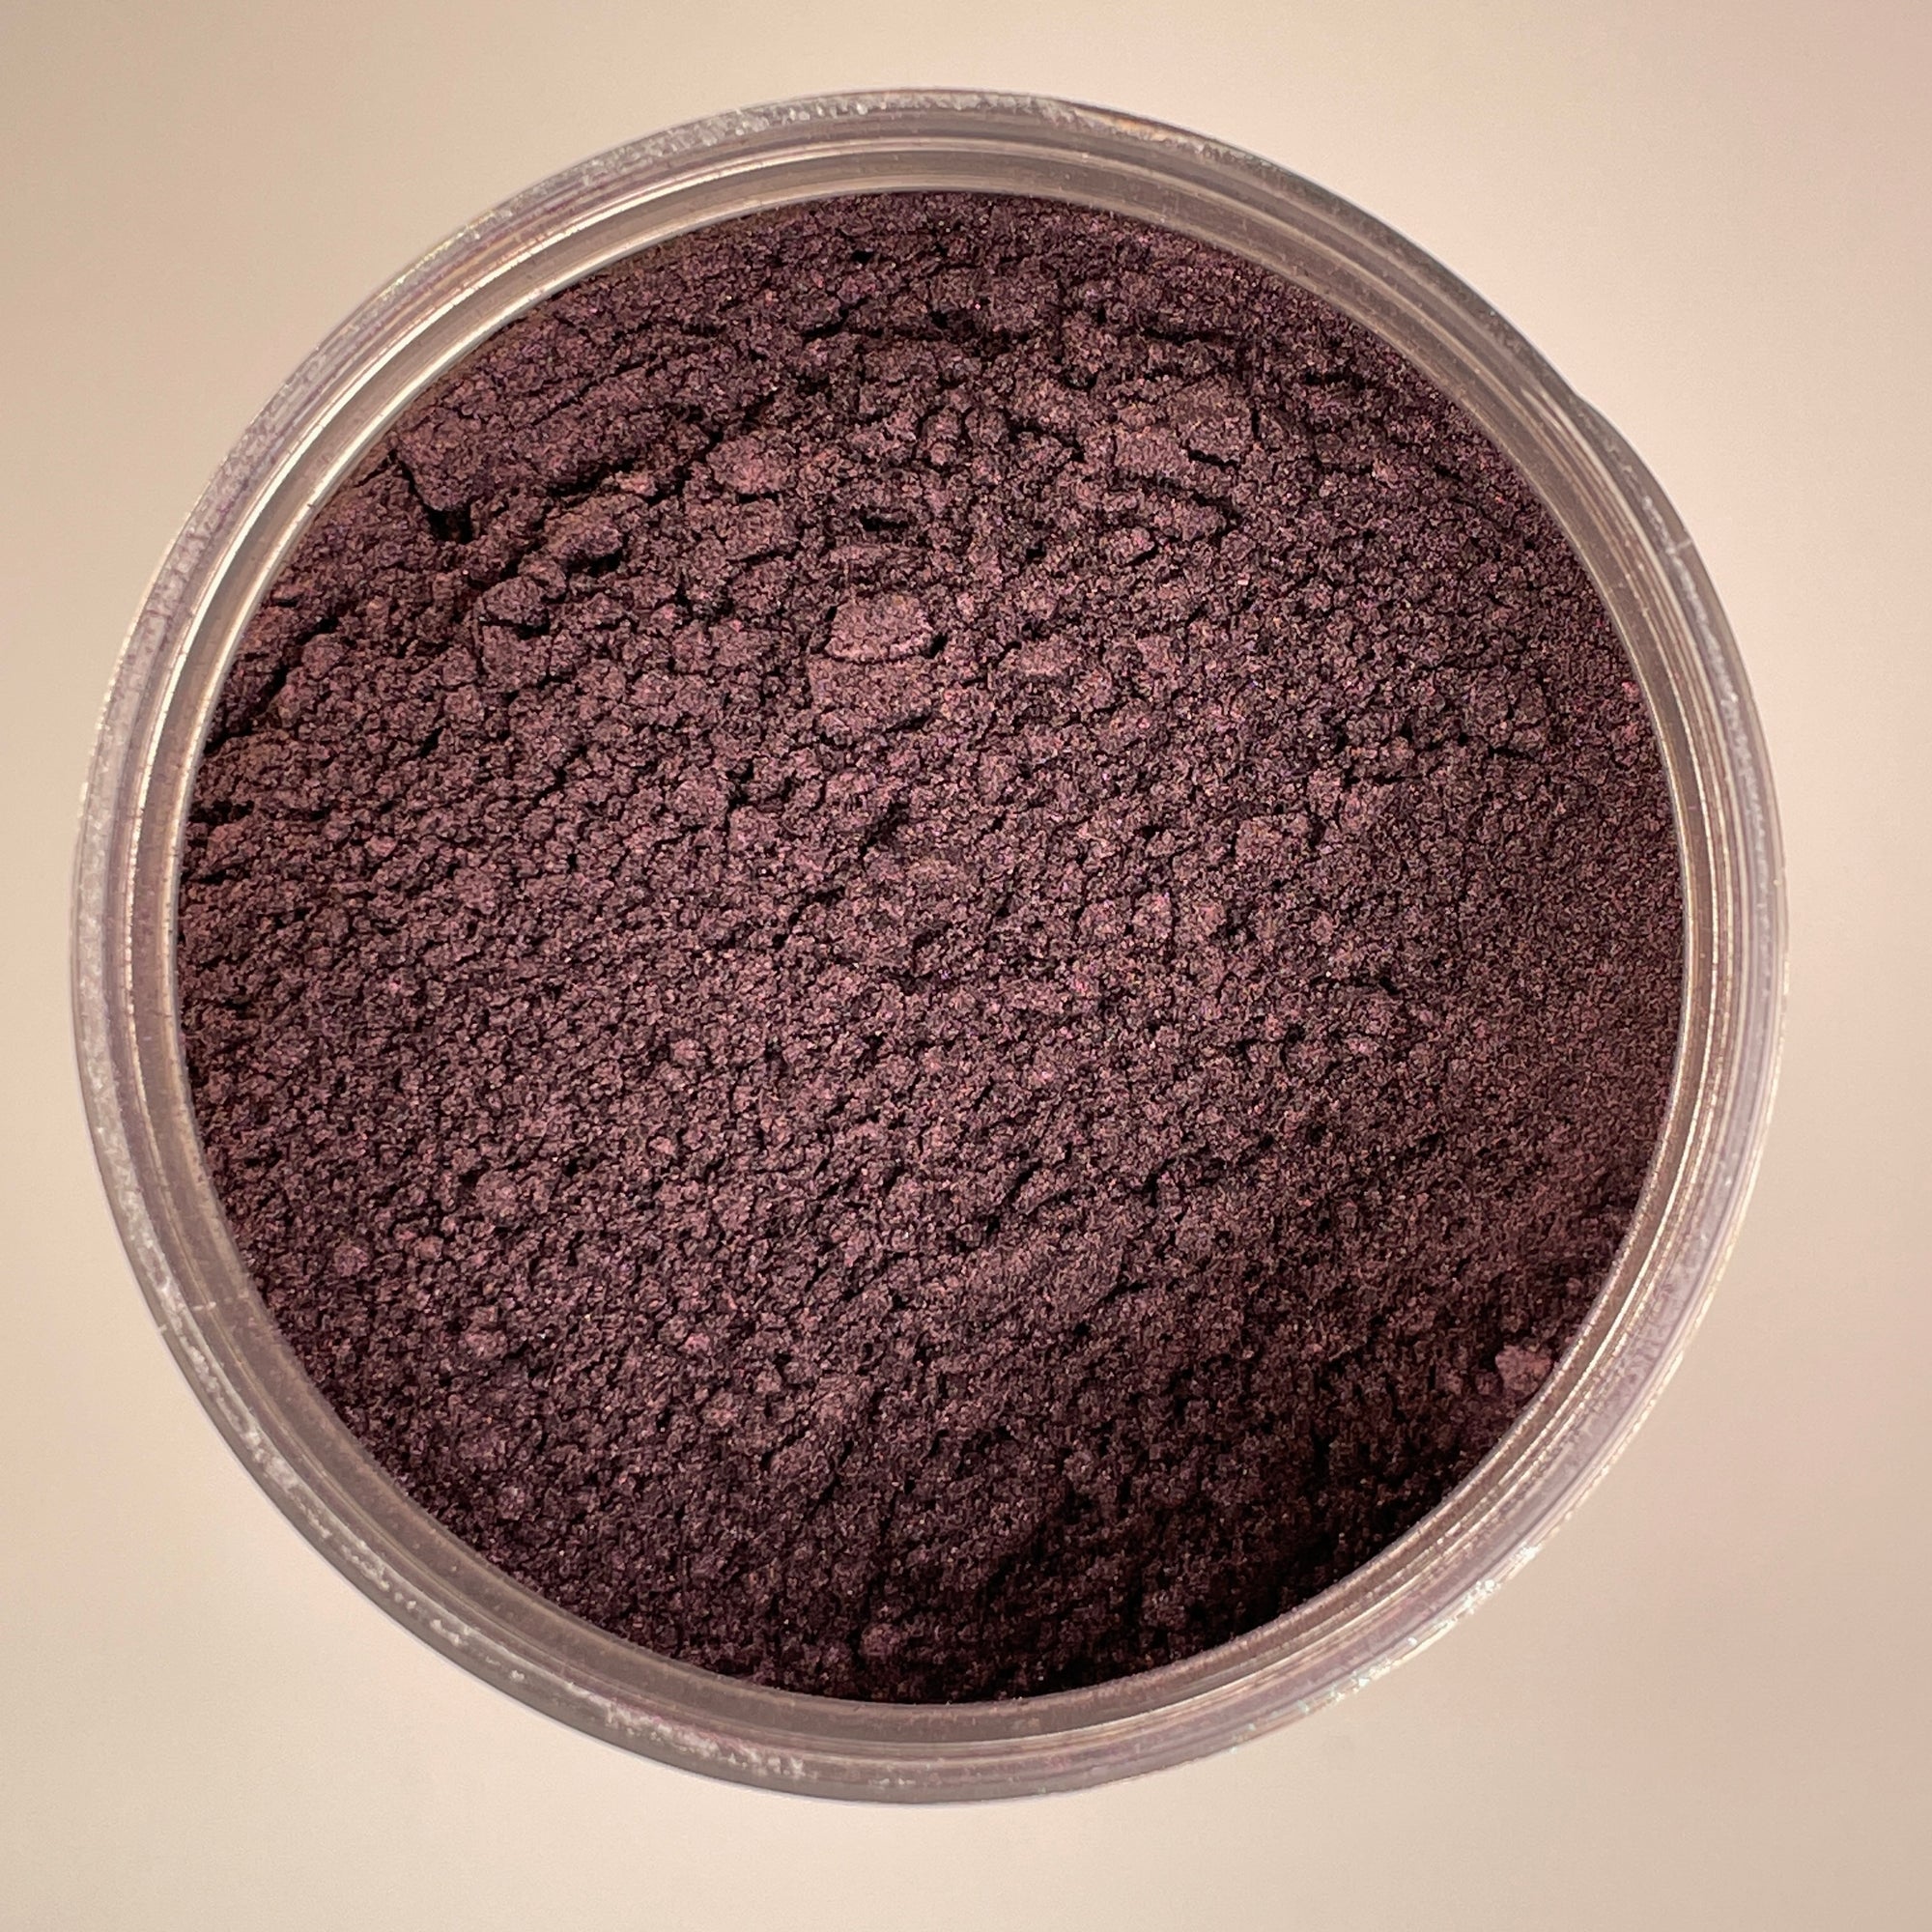 resin powder pigment arial view showing purple colour